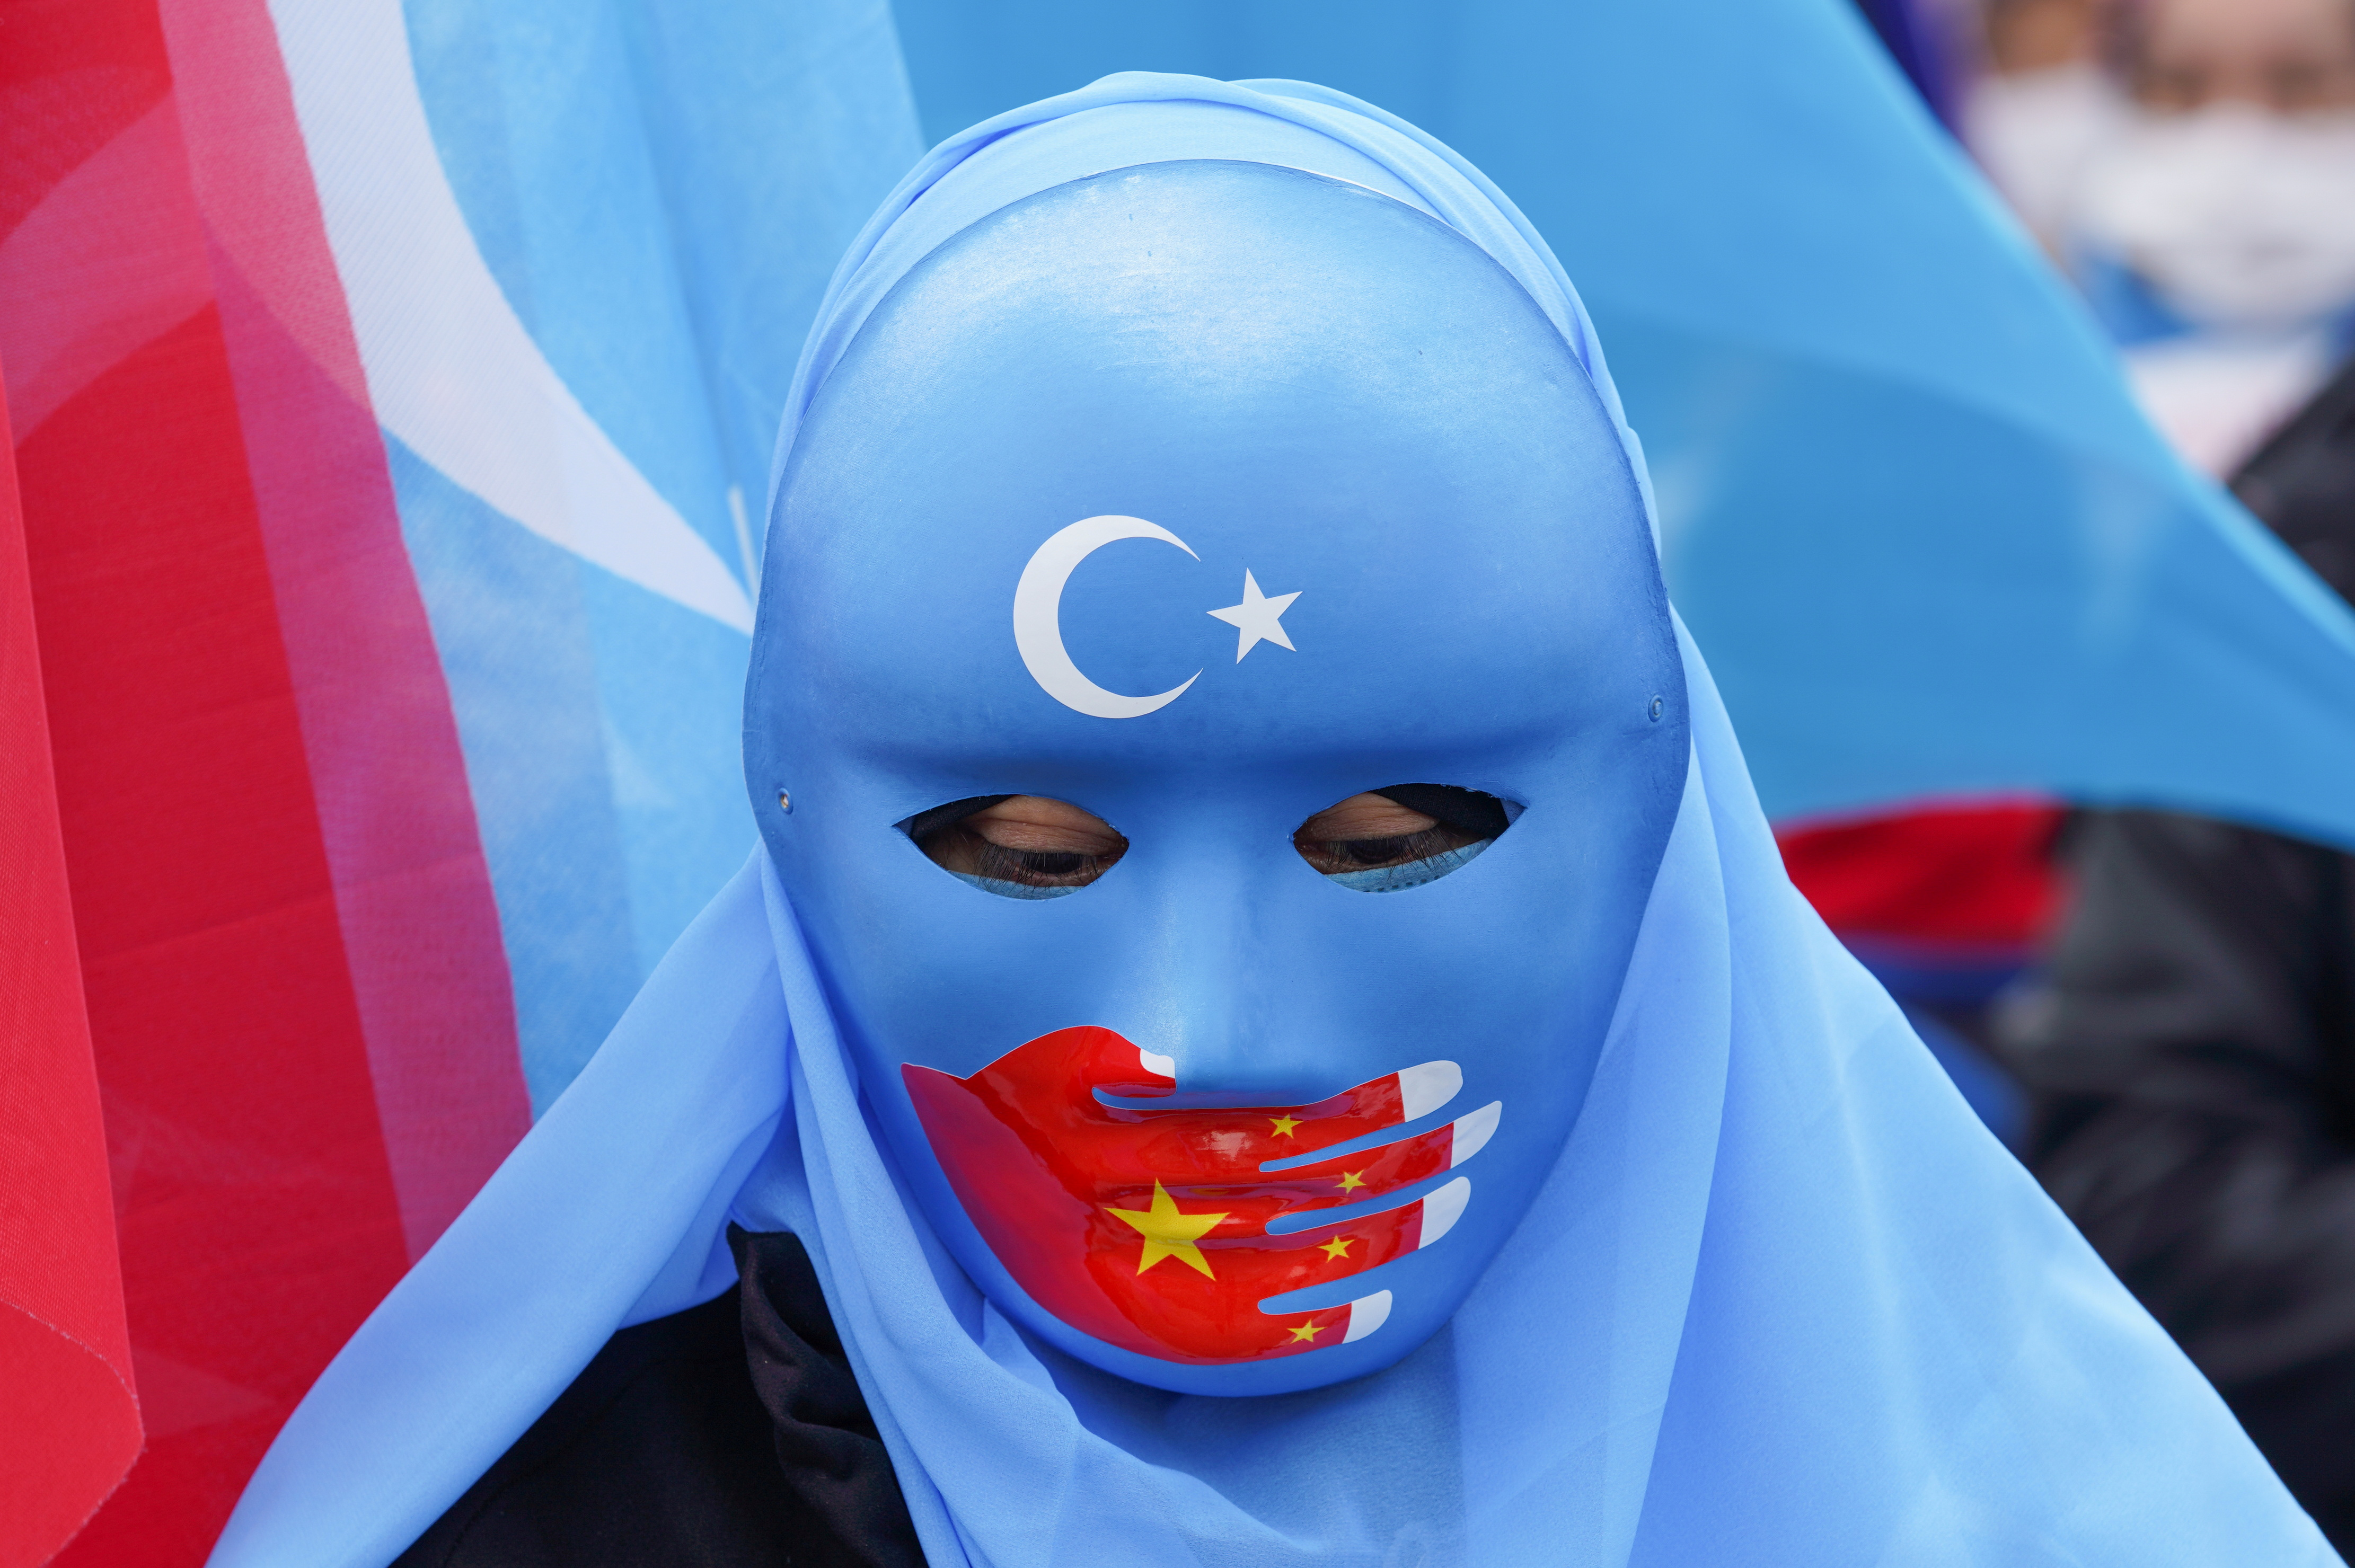 A demonstrator wearing a mask participates in a protest against Chinese State Councilor and Foreign Minister Wang Yi's visit, in Istanbul, Turkey, March 25, 2021. REUTERS/Kemal Aslan/File Photo